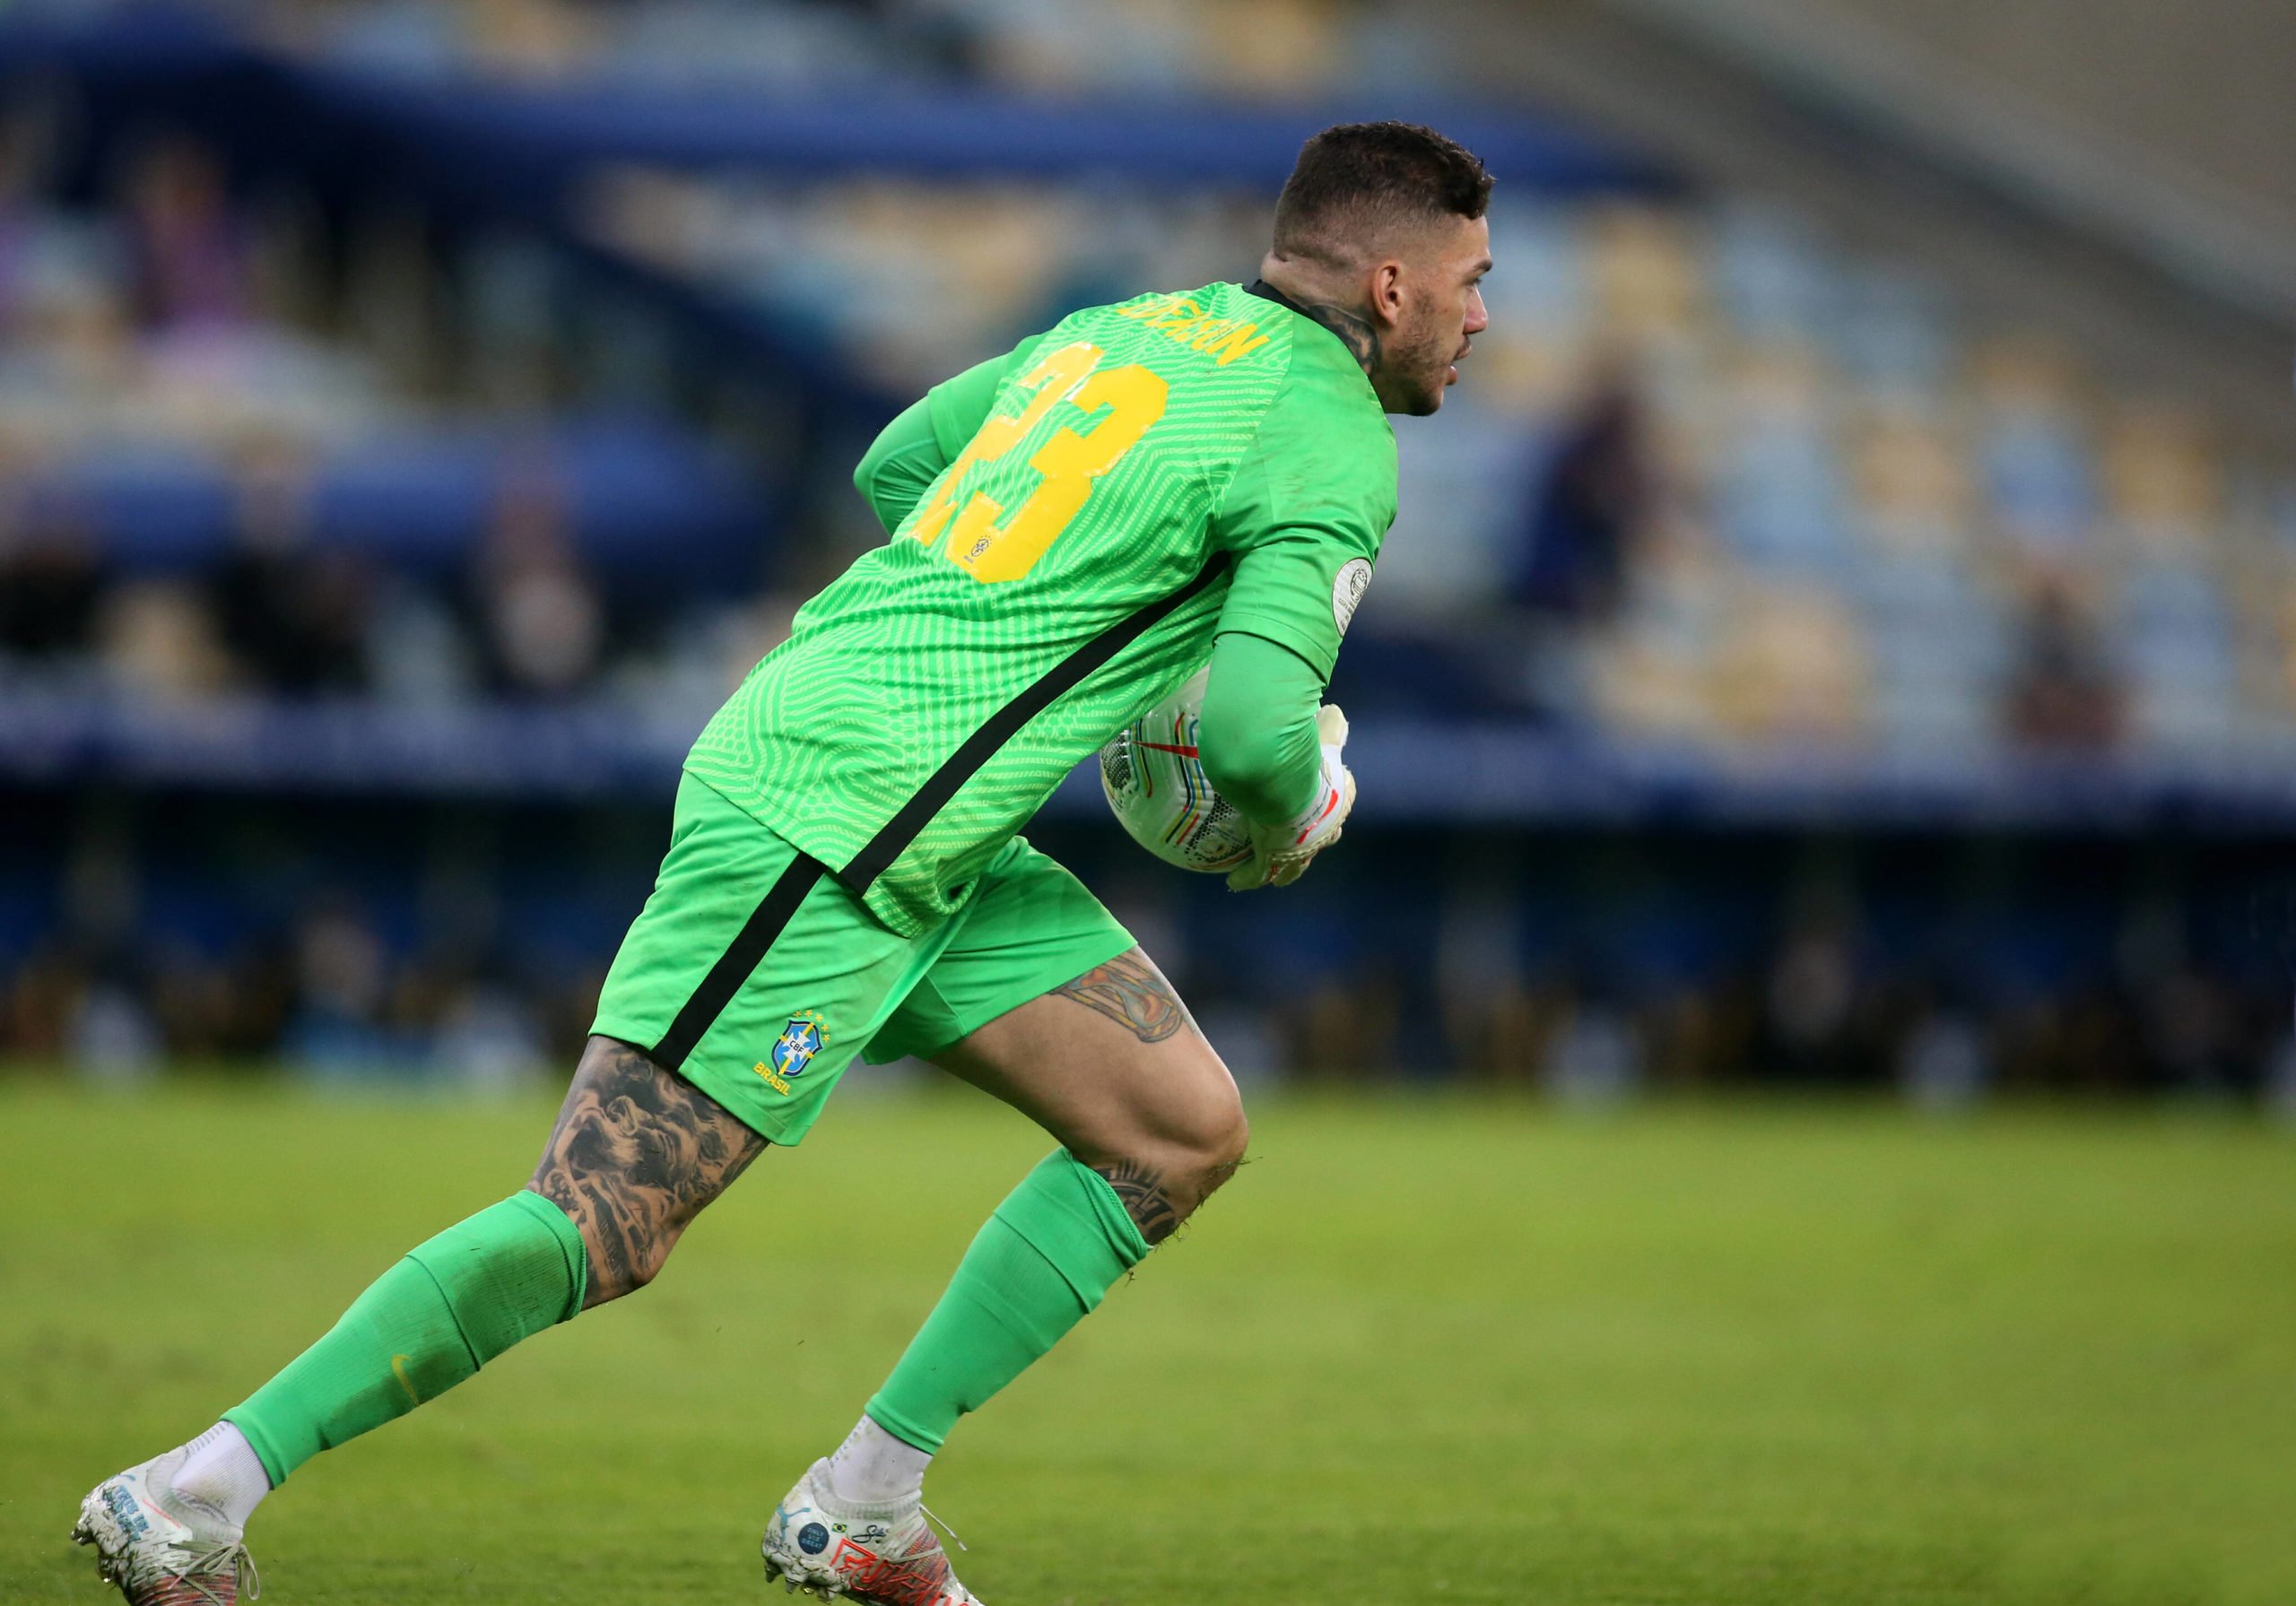 Manchester City set to begin contract talks with Ederson who is seen in the picture